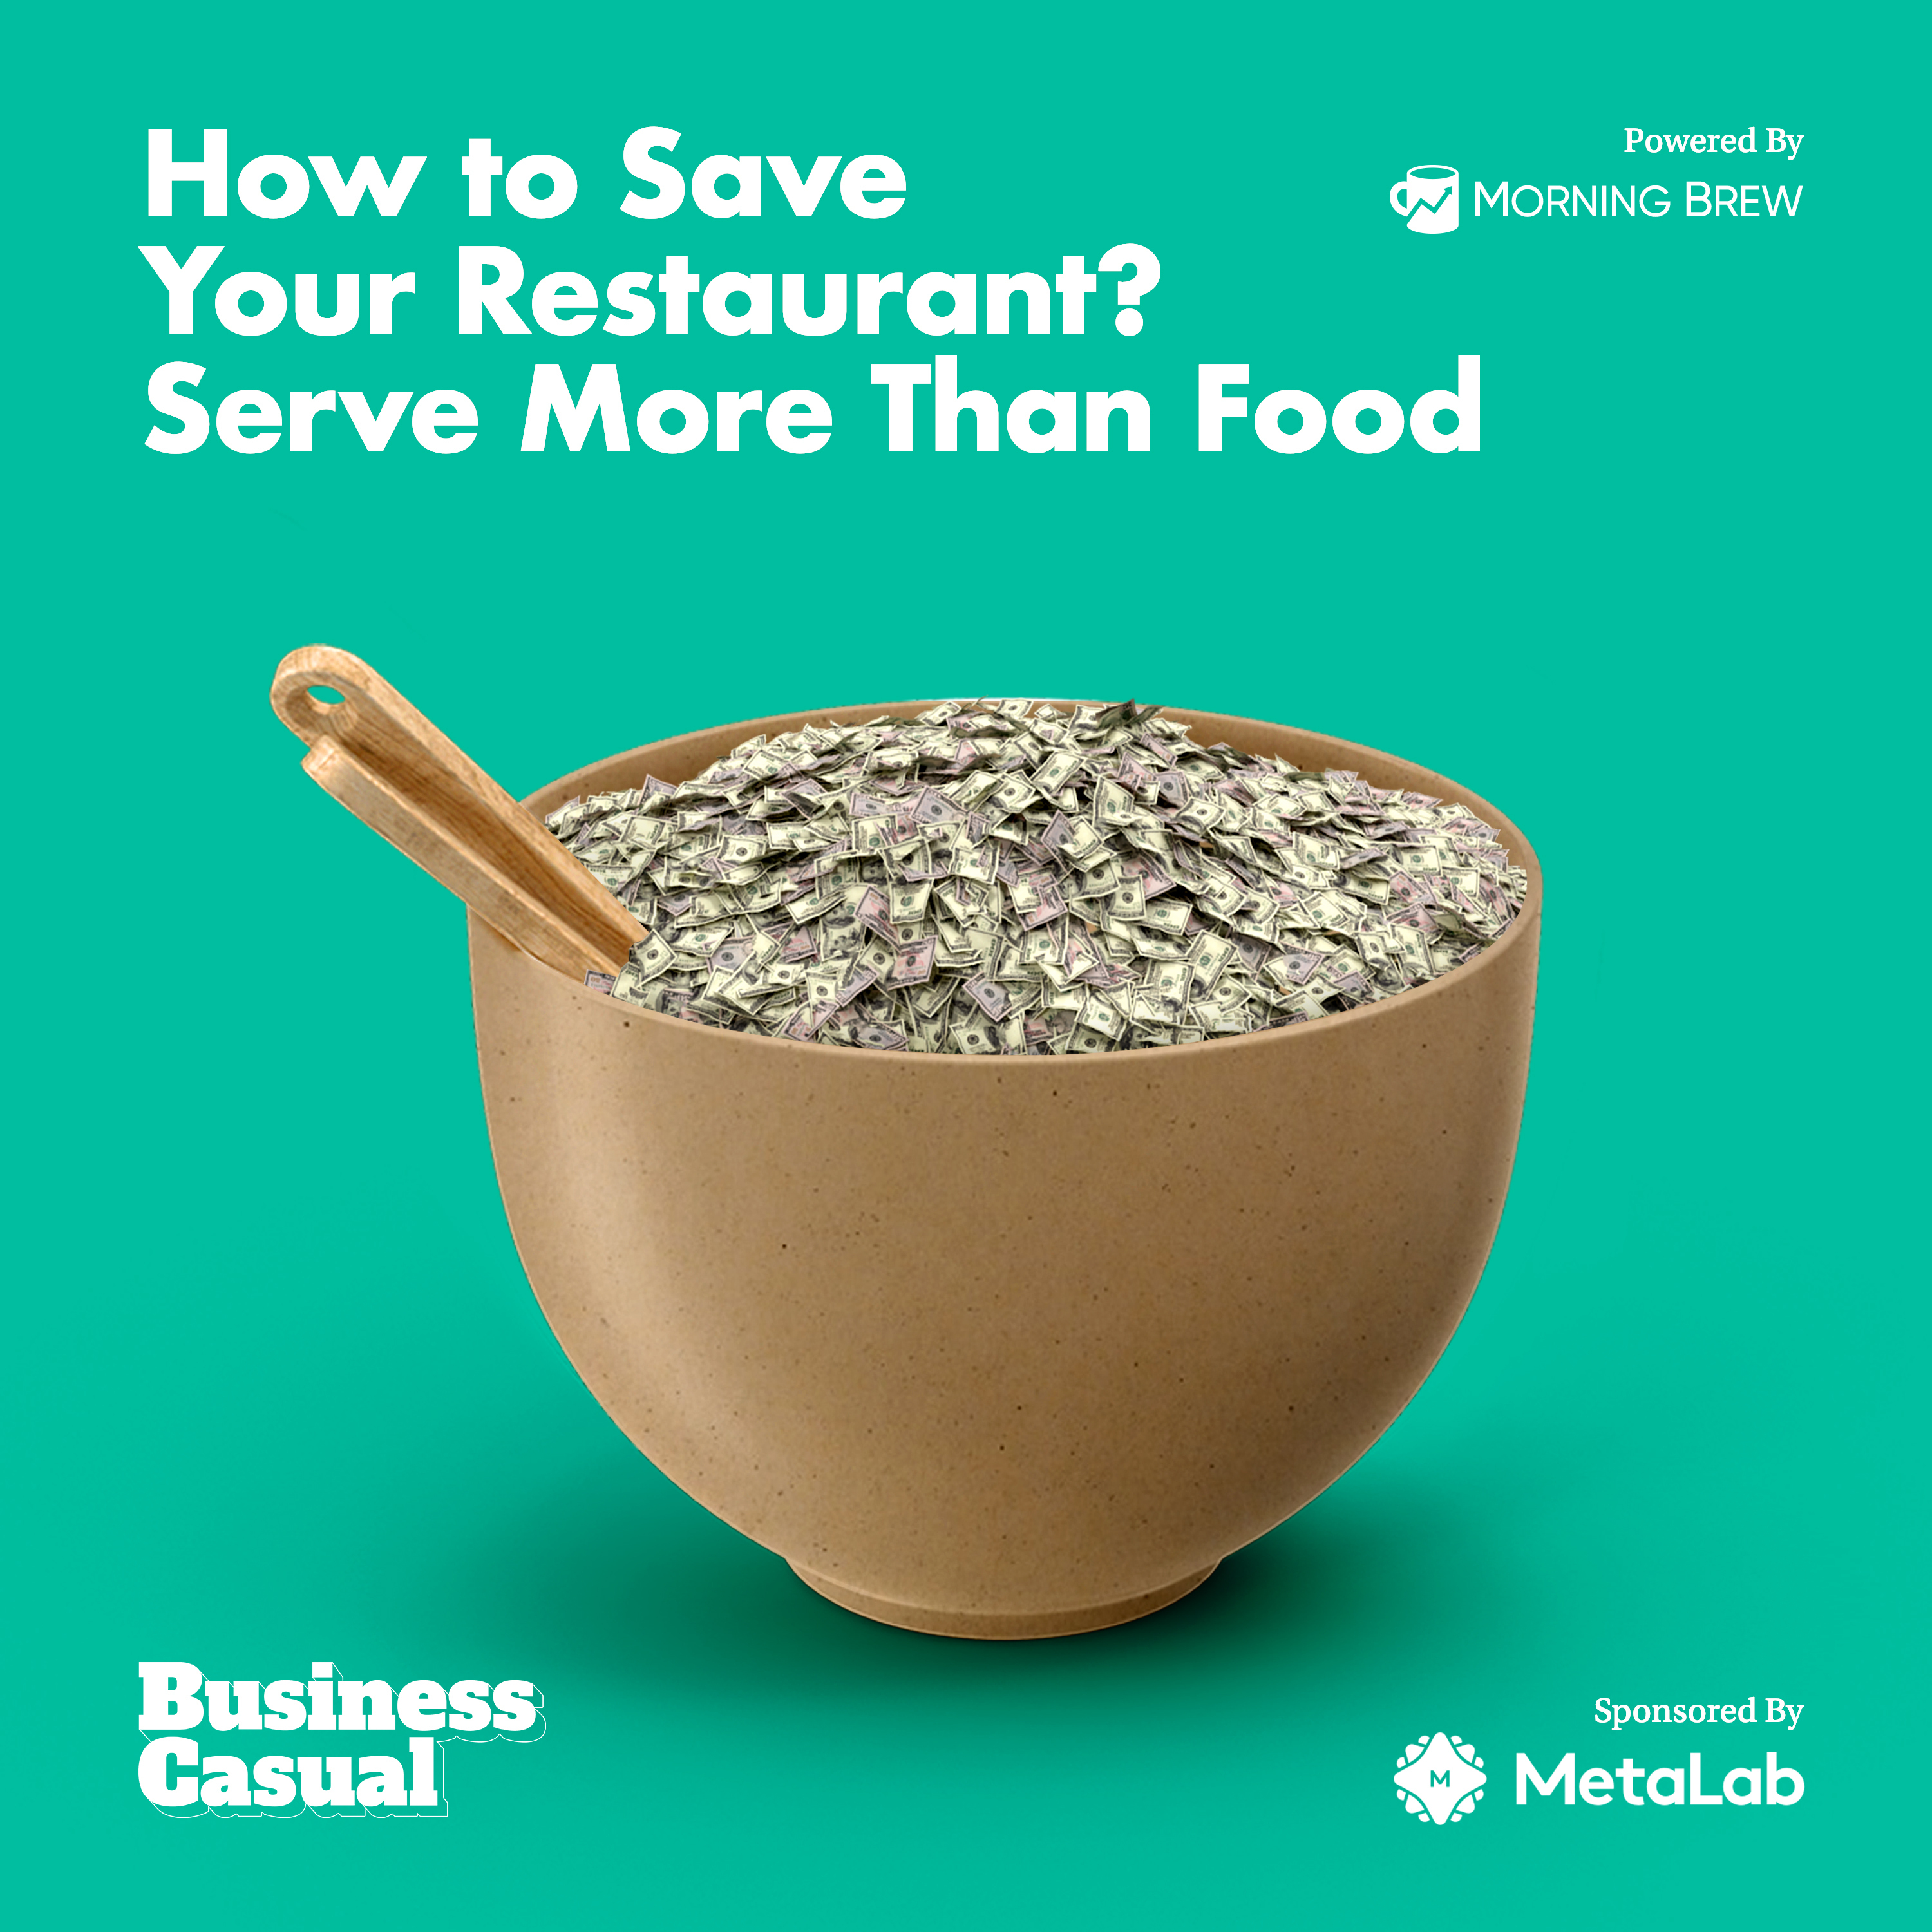 How to Save Your Restaurant? Serve More Than Food Image